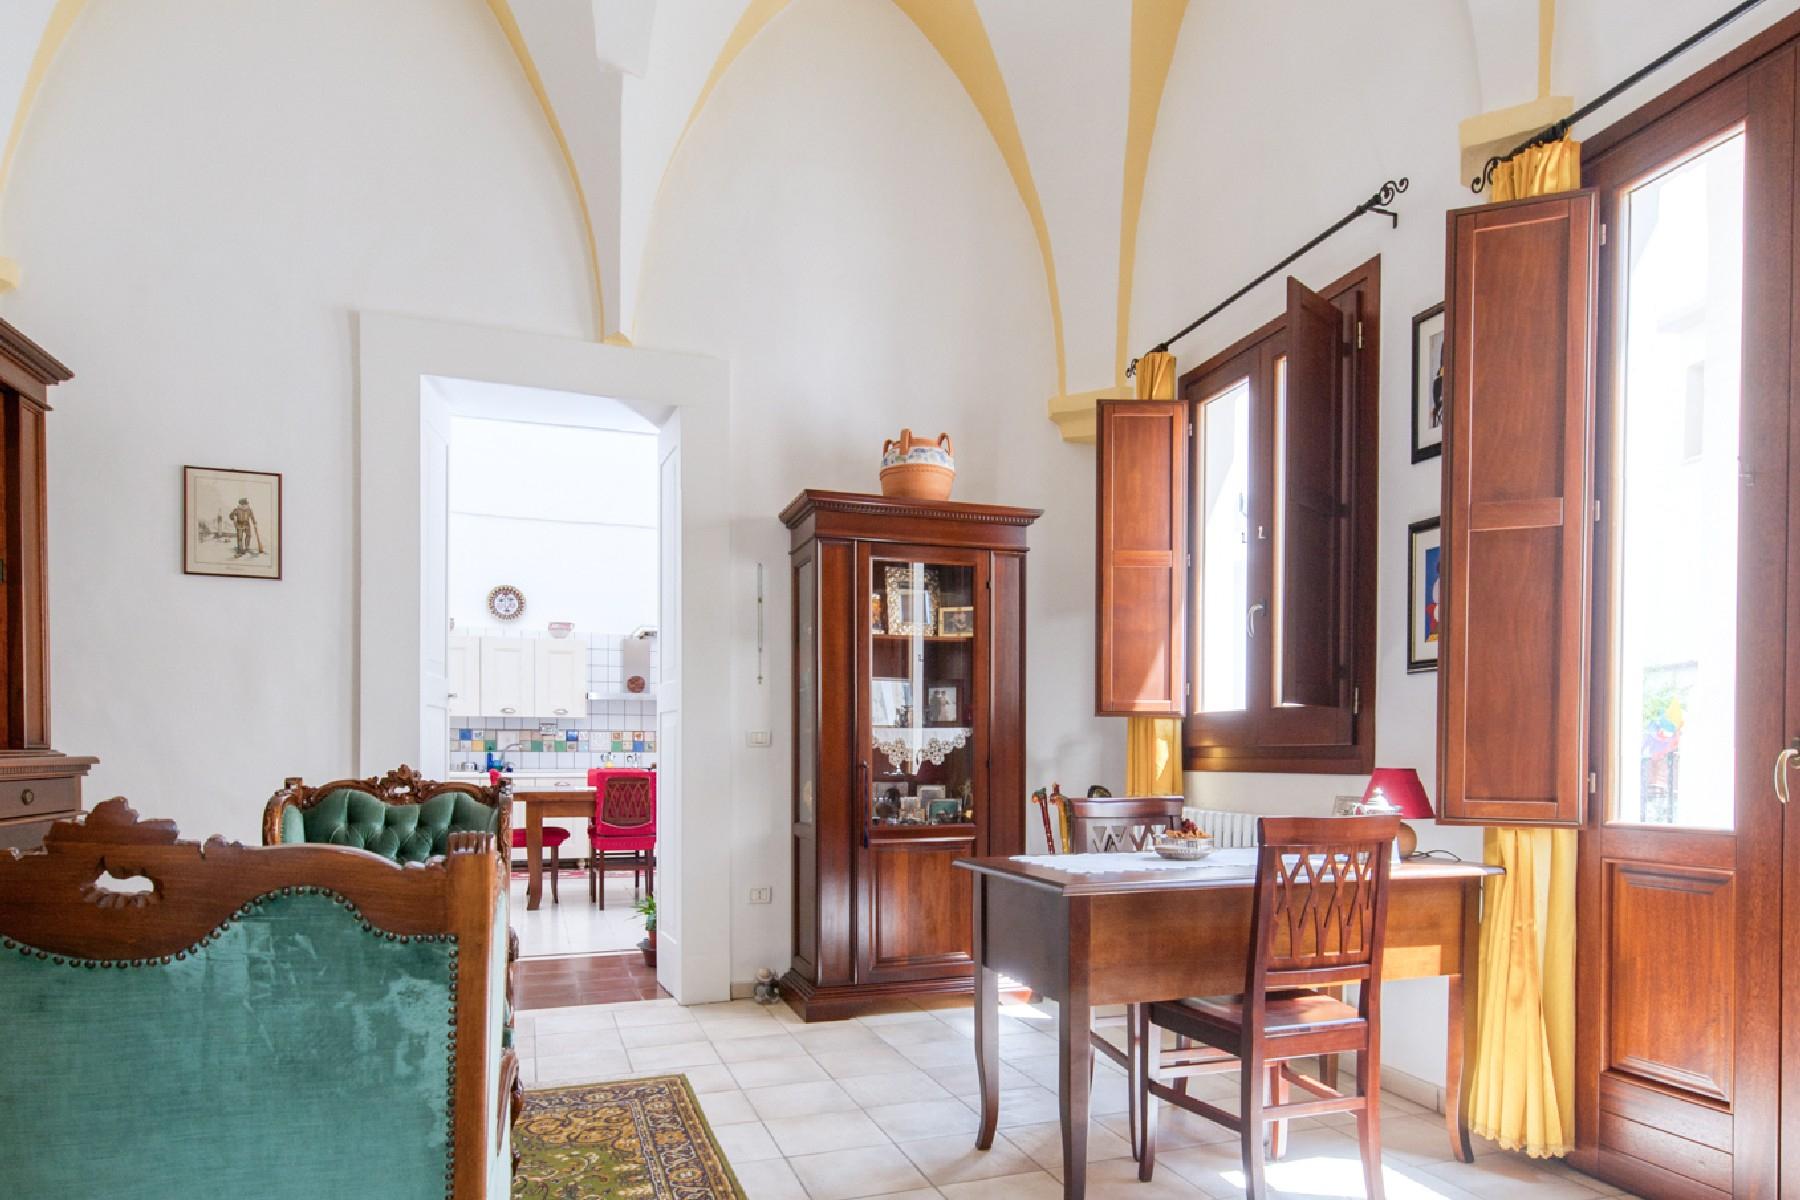 Perfectly renovated Palazzetto in the historic center of Parabita - 2